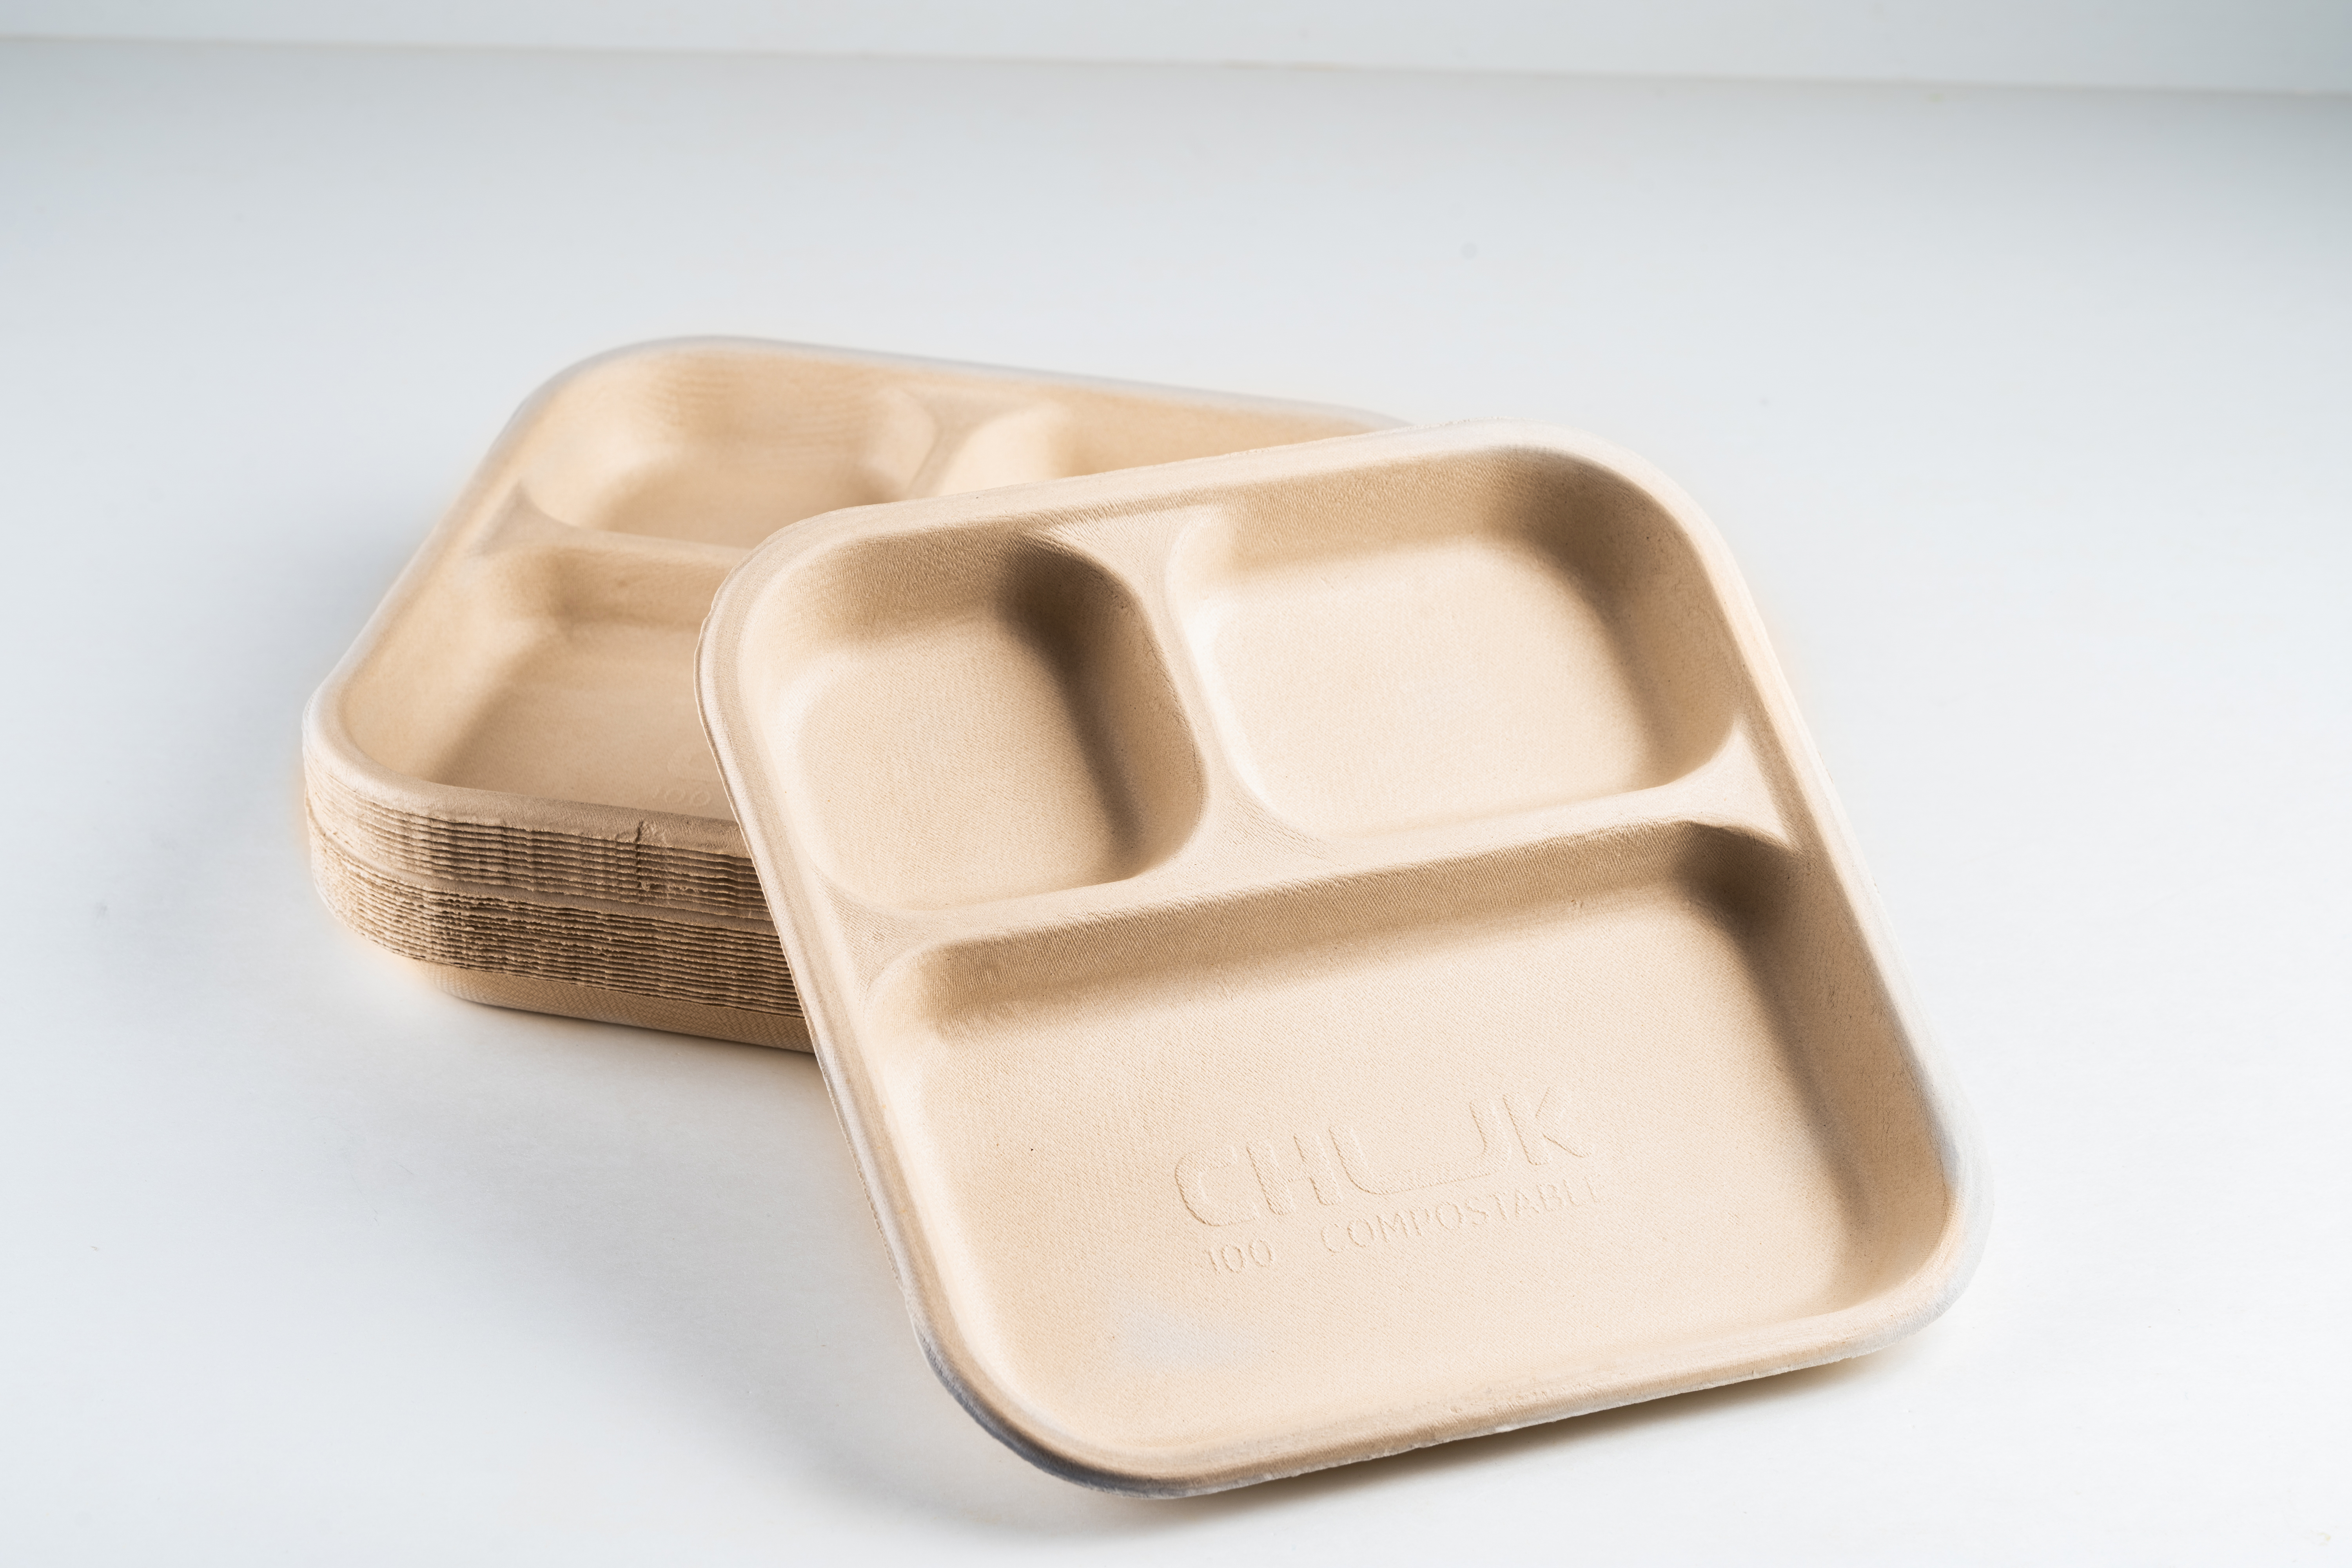 Chuk BioDegradable Disposable and Eco-Friendly Meal Tray (3 Compartment) –  Set of 25